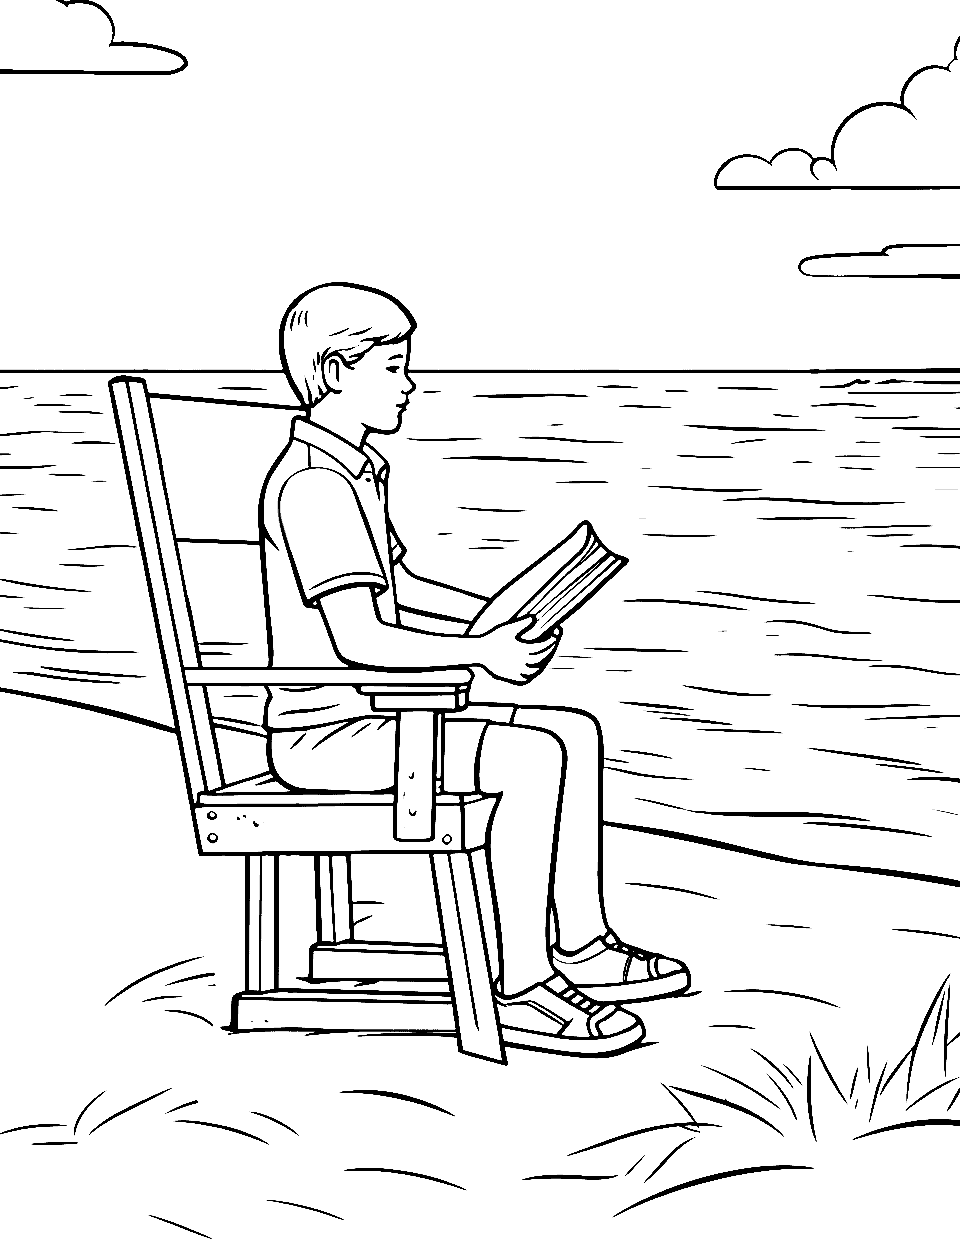 Lifeguard on Duty Coloring Page - A focused lifeguard sitting on a raised chair, scanning the swimming area.